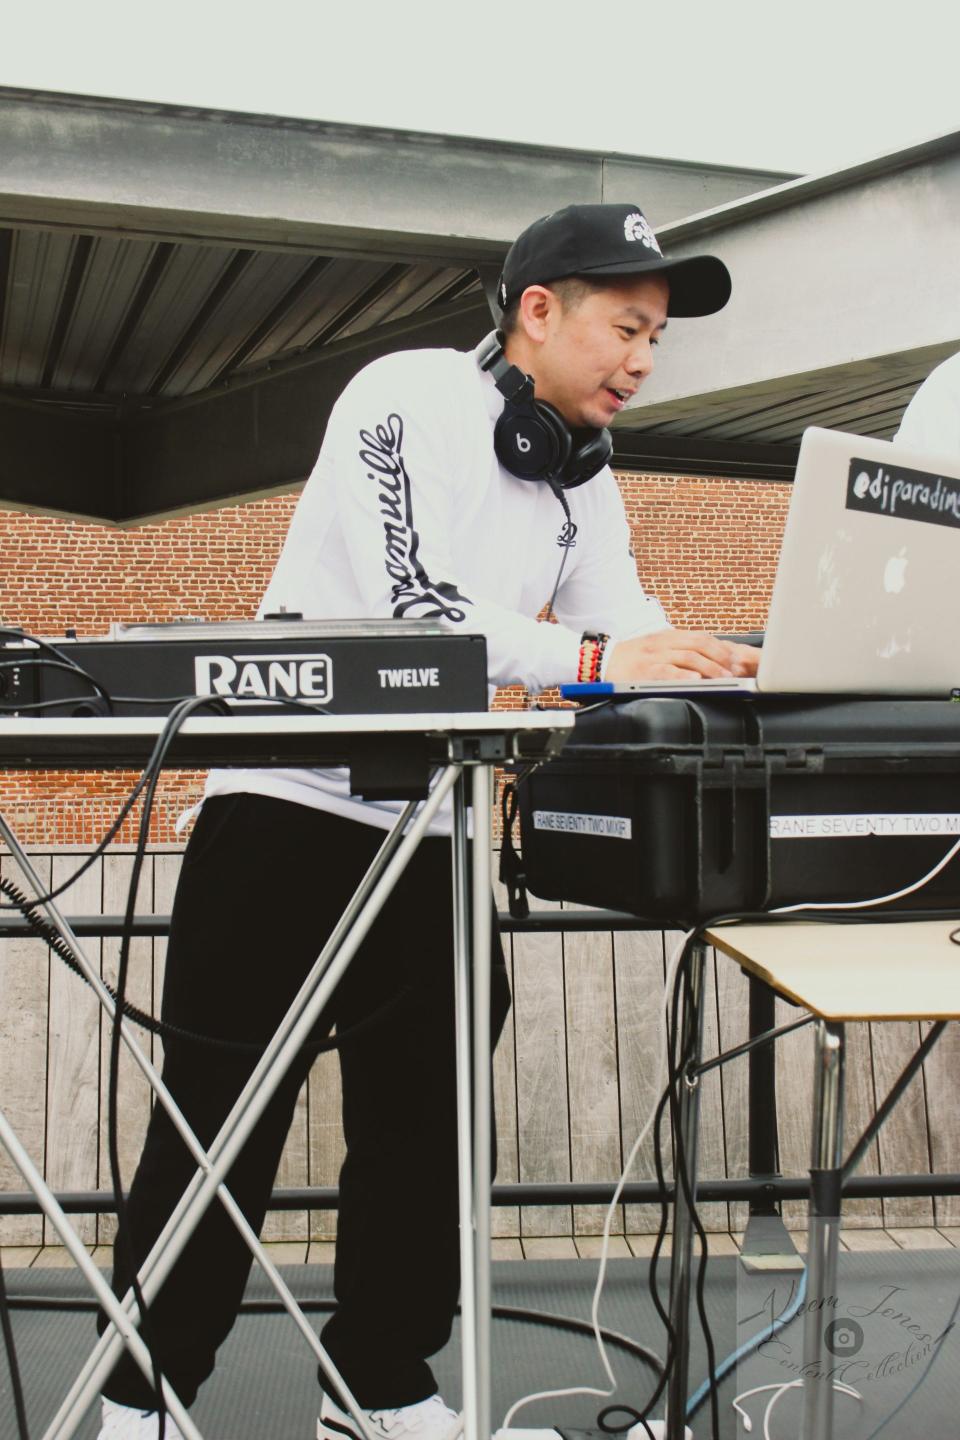 David Ngoi, also known as DJ Paradime, has helped with sound production at the annual Dreamville Festival in Raleigh.